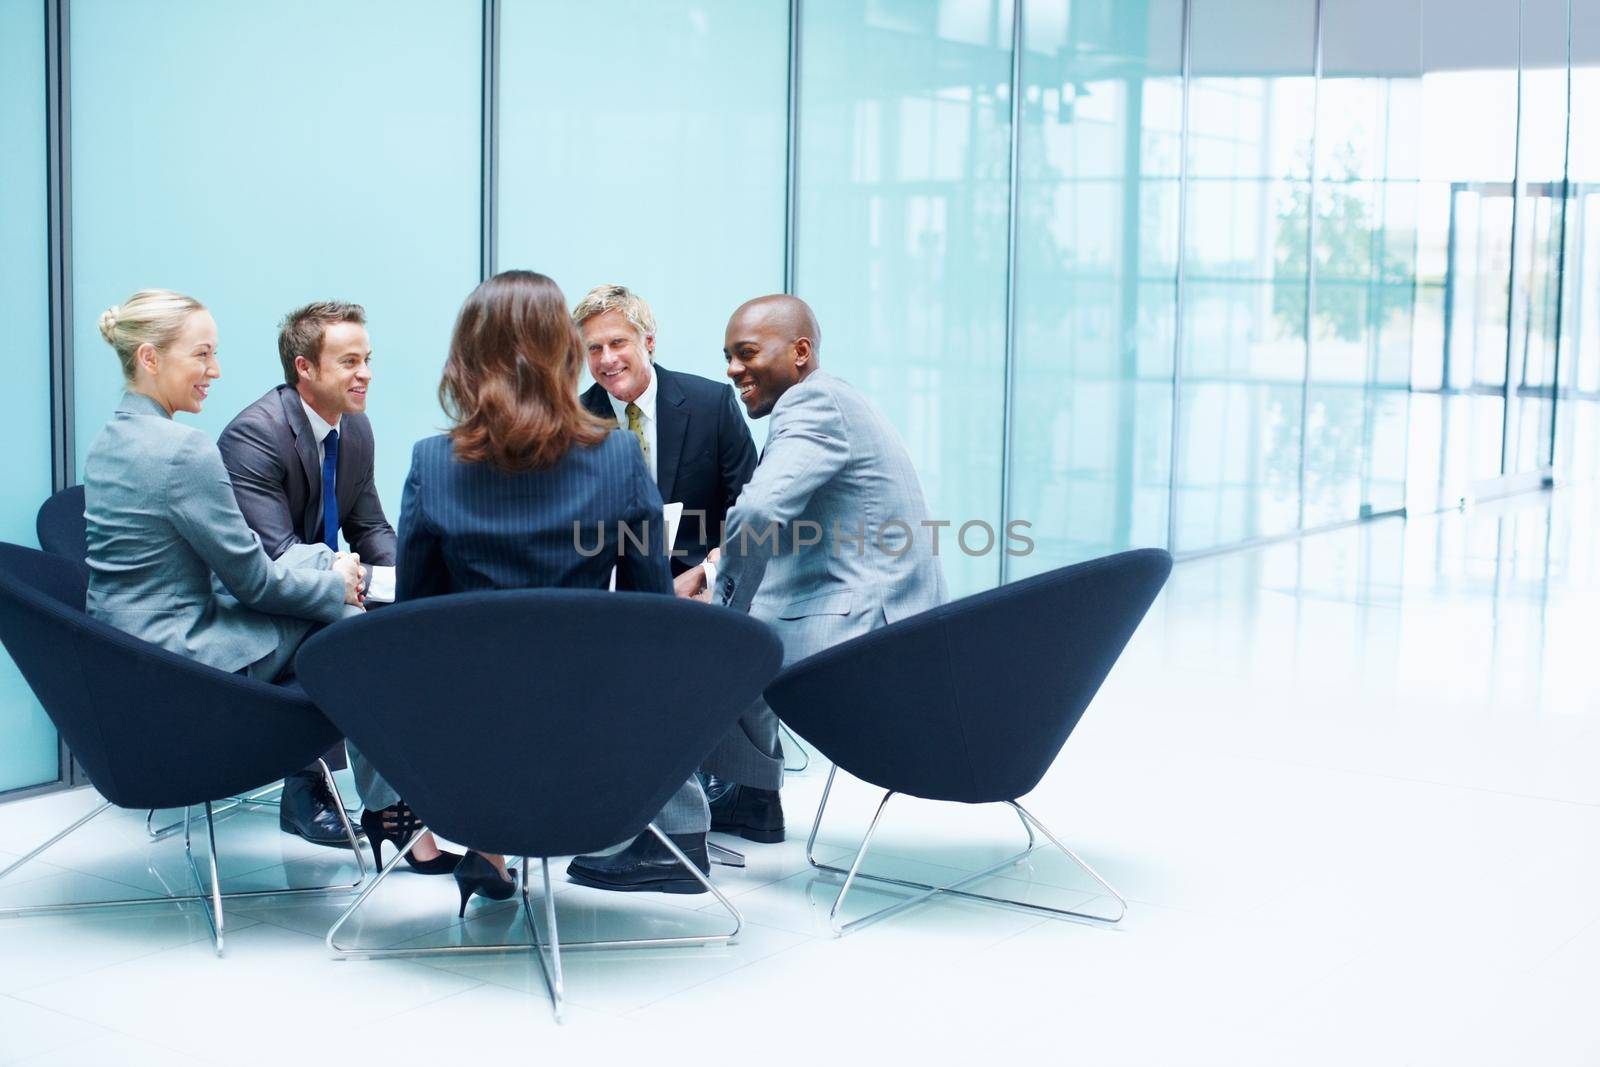 Business people in discussion. Portrait of multi racial business people discussing in meeting